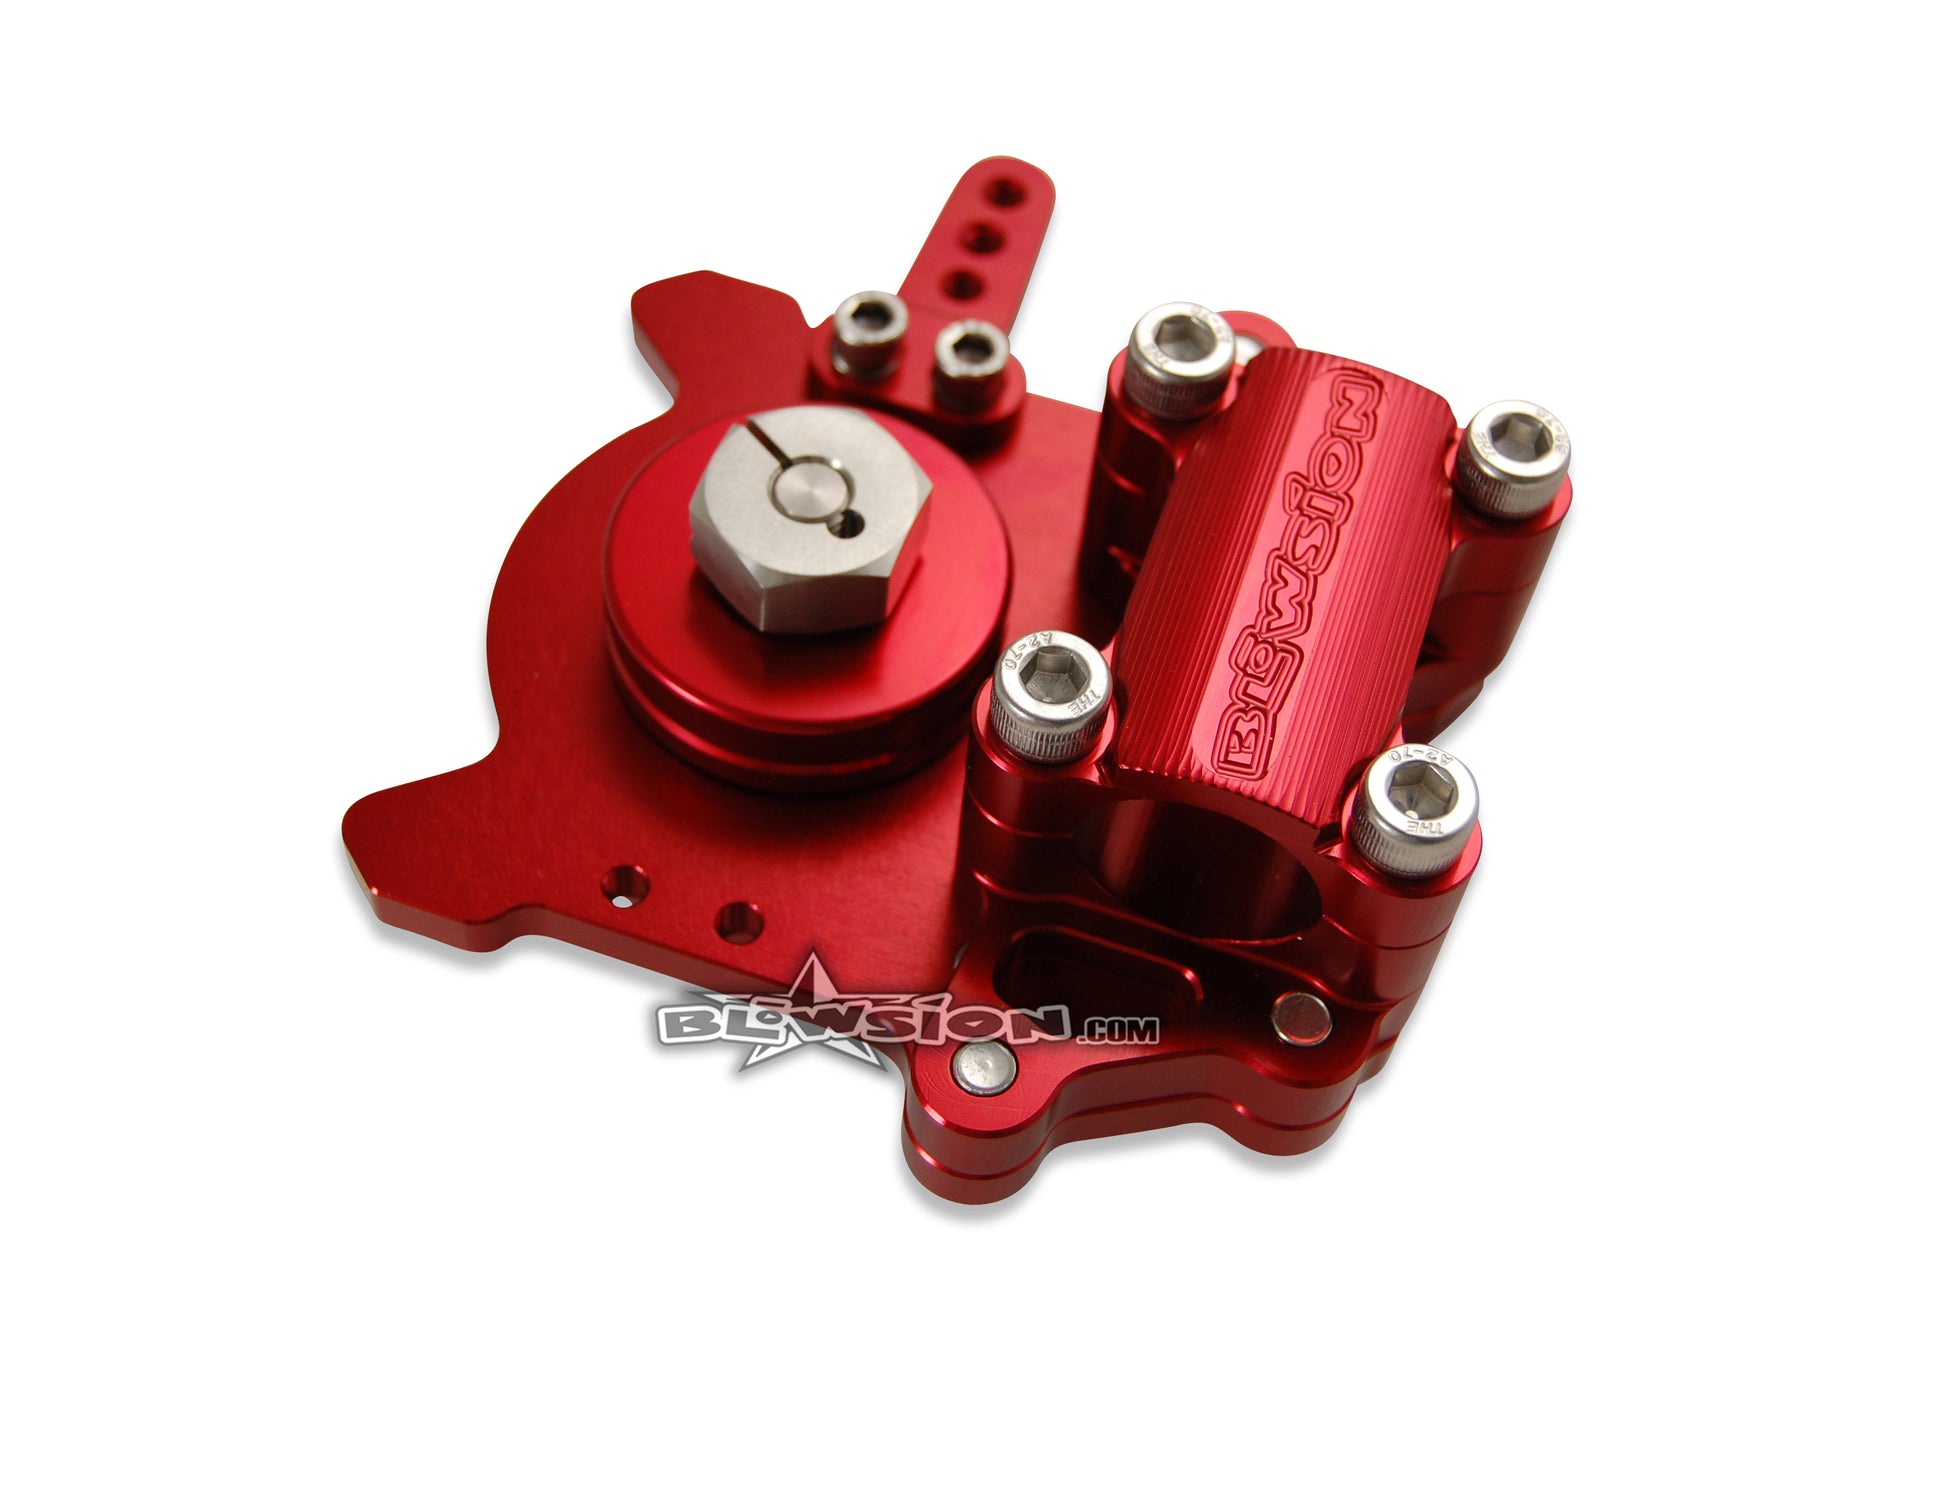 Blowsion Steering System 1-1/8" Fat - Anodized Red